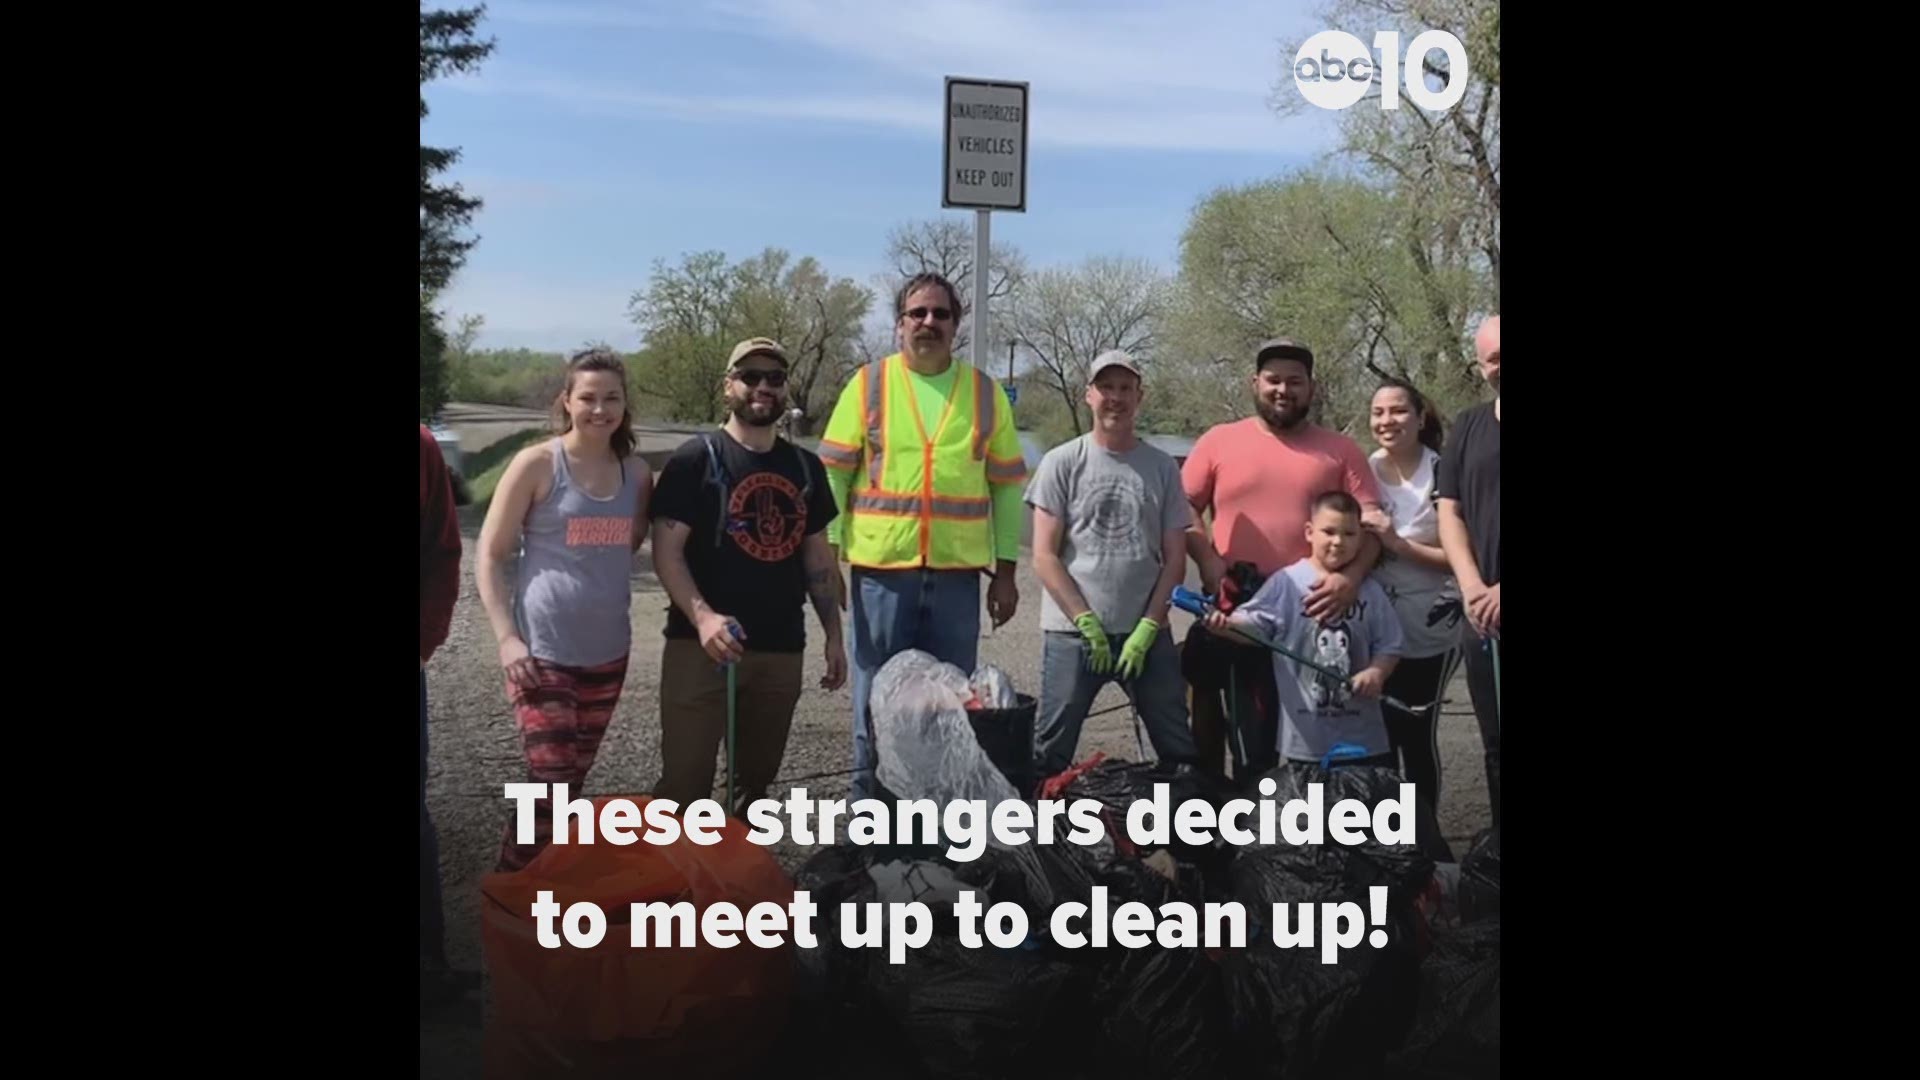 When Namu Williams moved to Sacramento, he didn't know many people. He took to the Sacramento Reddit to organize a trash clean-up day to make a few friends - and inspired some of his neighbors to keep the good going.